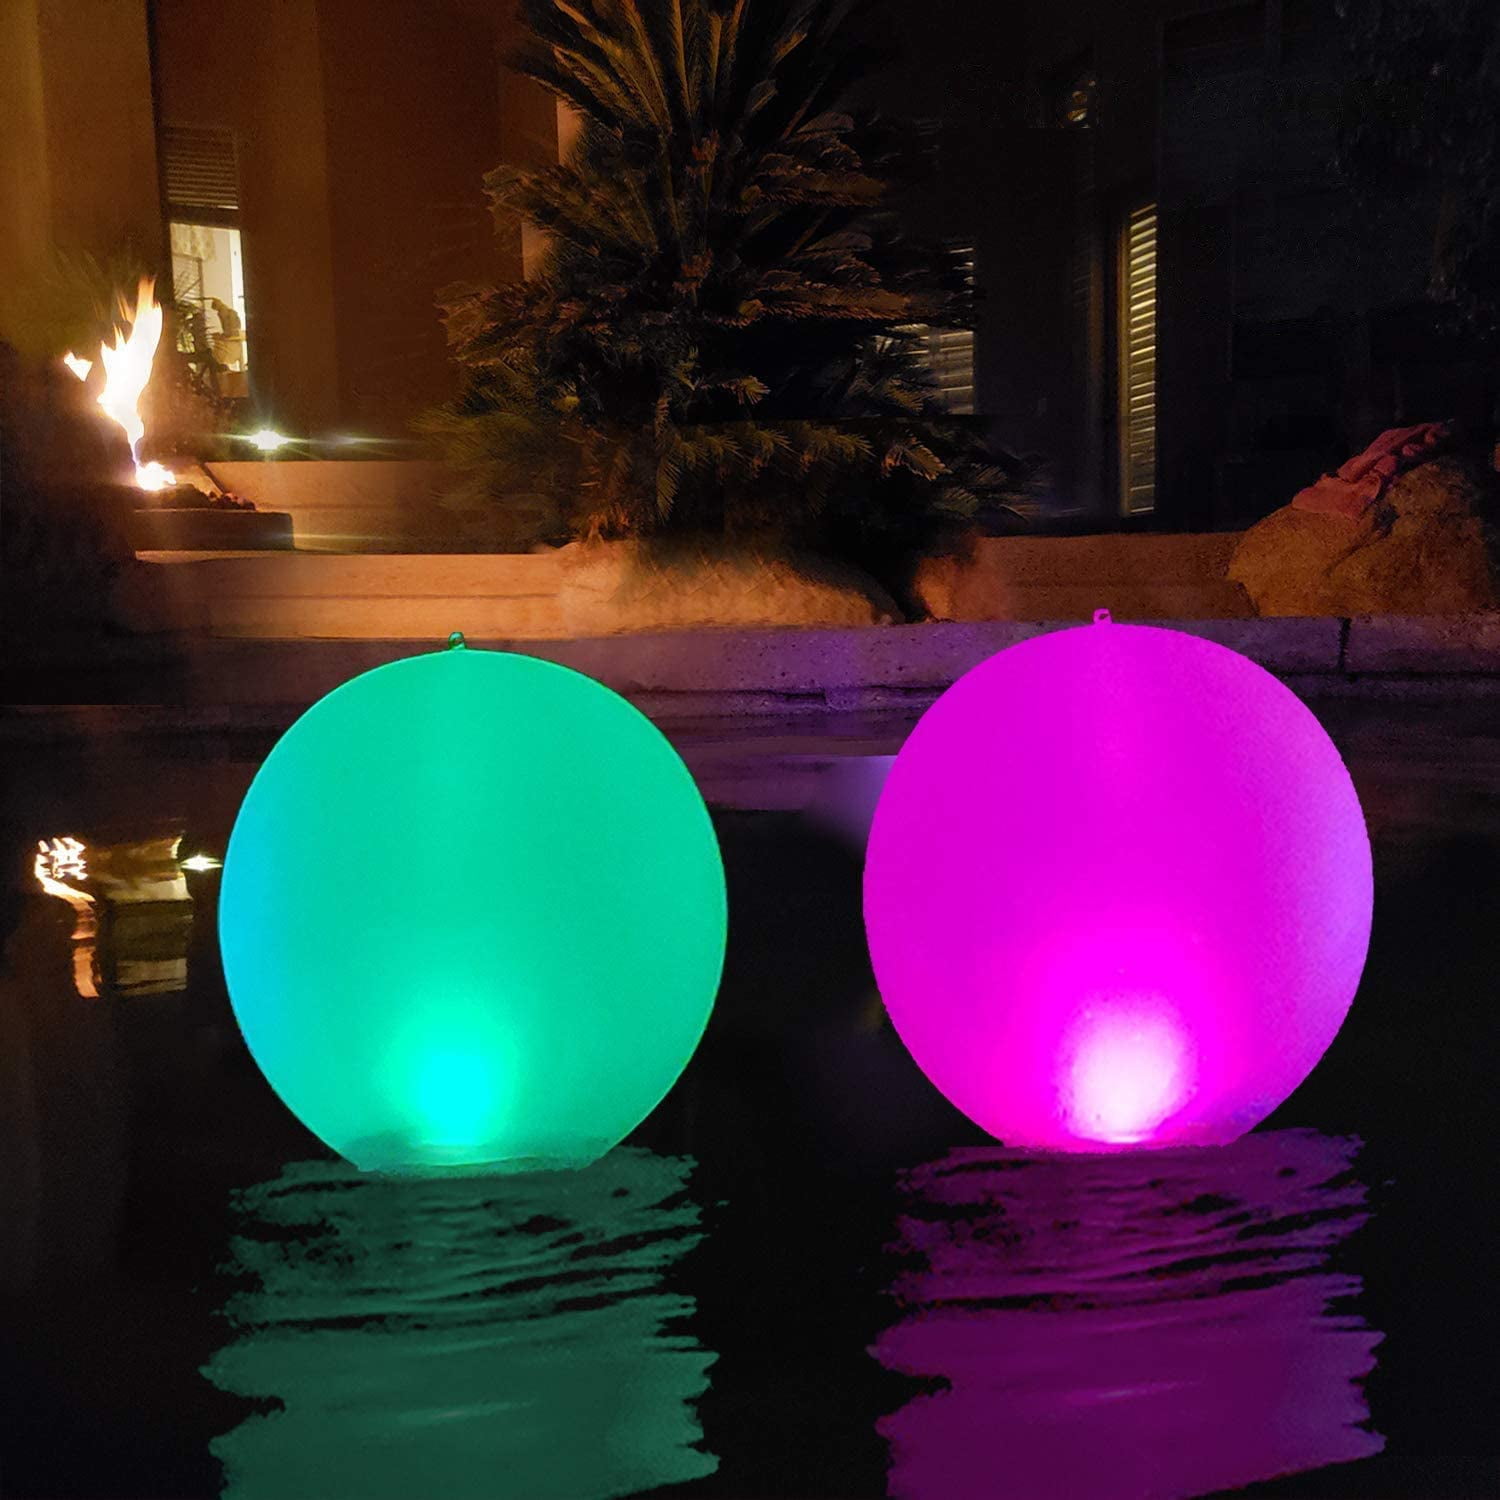 adyic Solar LED Night Light Stone Solar IP67 Waterproof Floating Pool Lights Garden Lights 8 Colors Changing with Remote Control for Pool Garden Backyard Lawn Beach Pond Party Decorations 3 Packs 